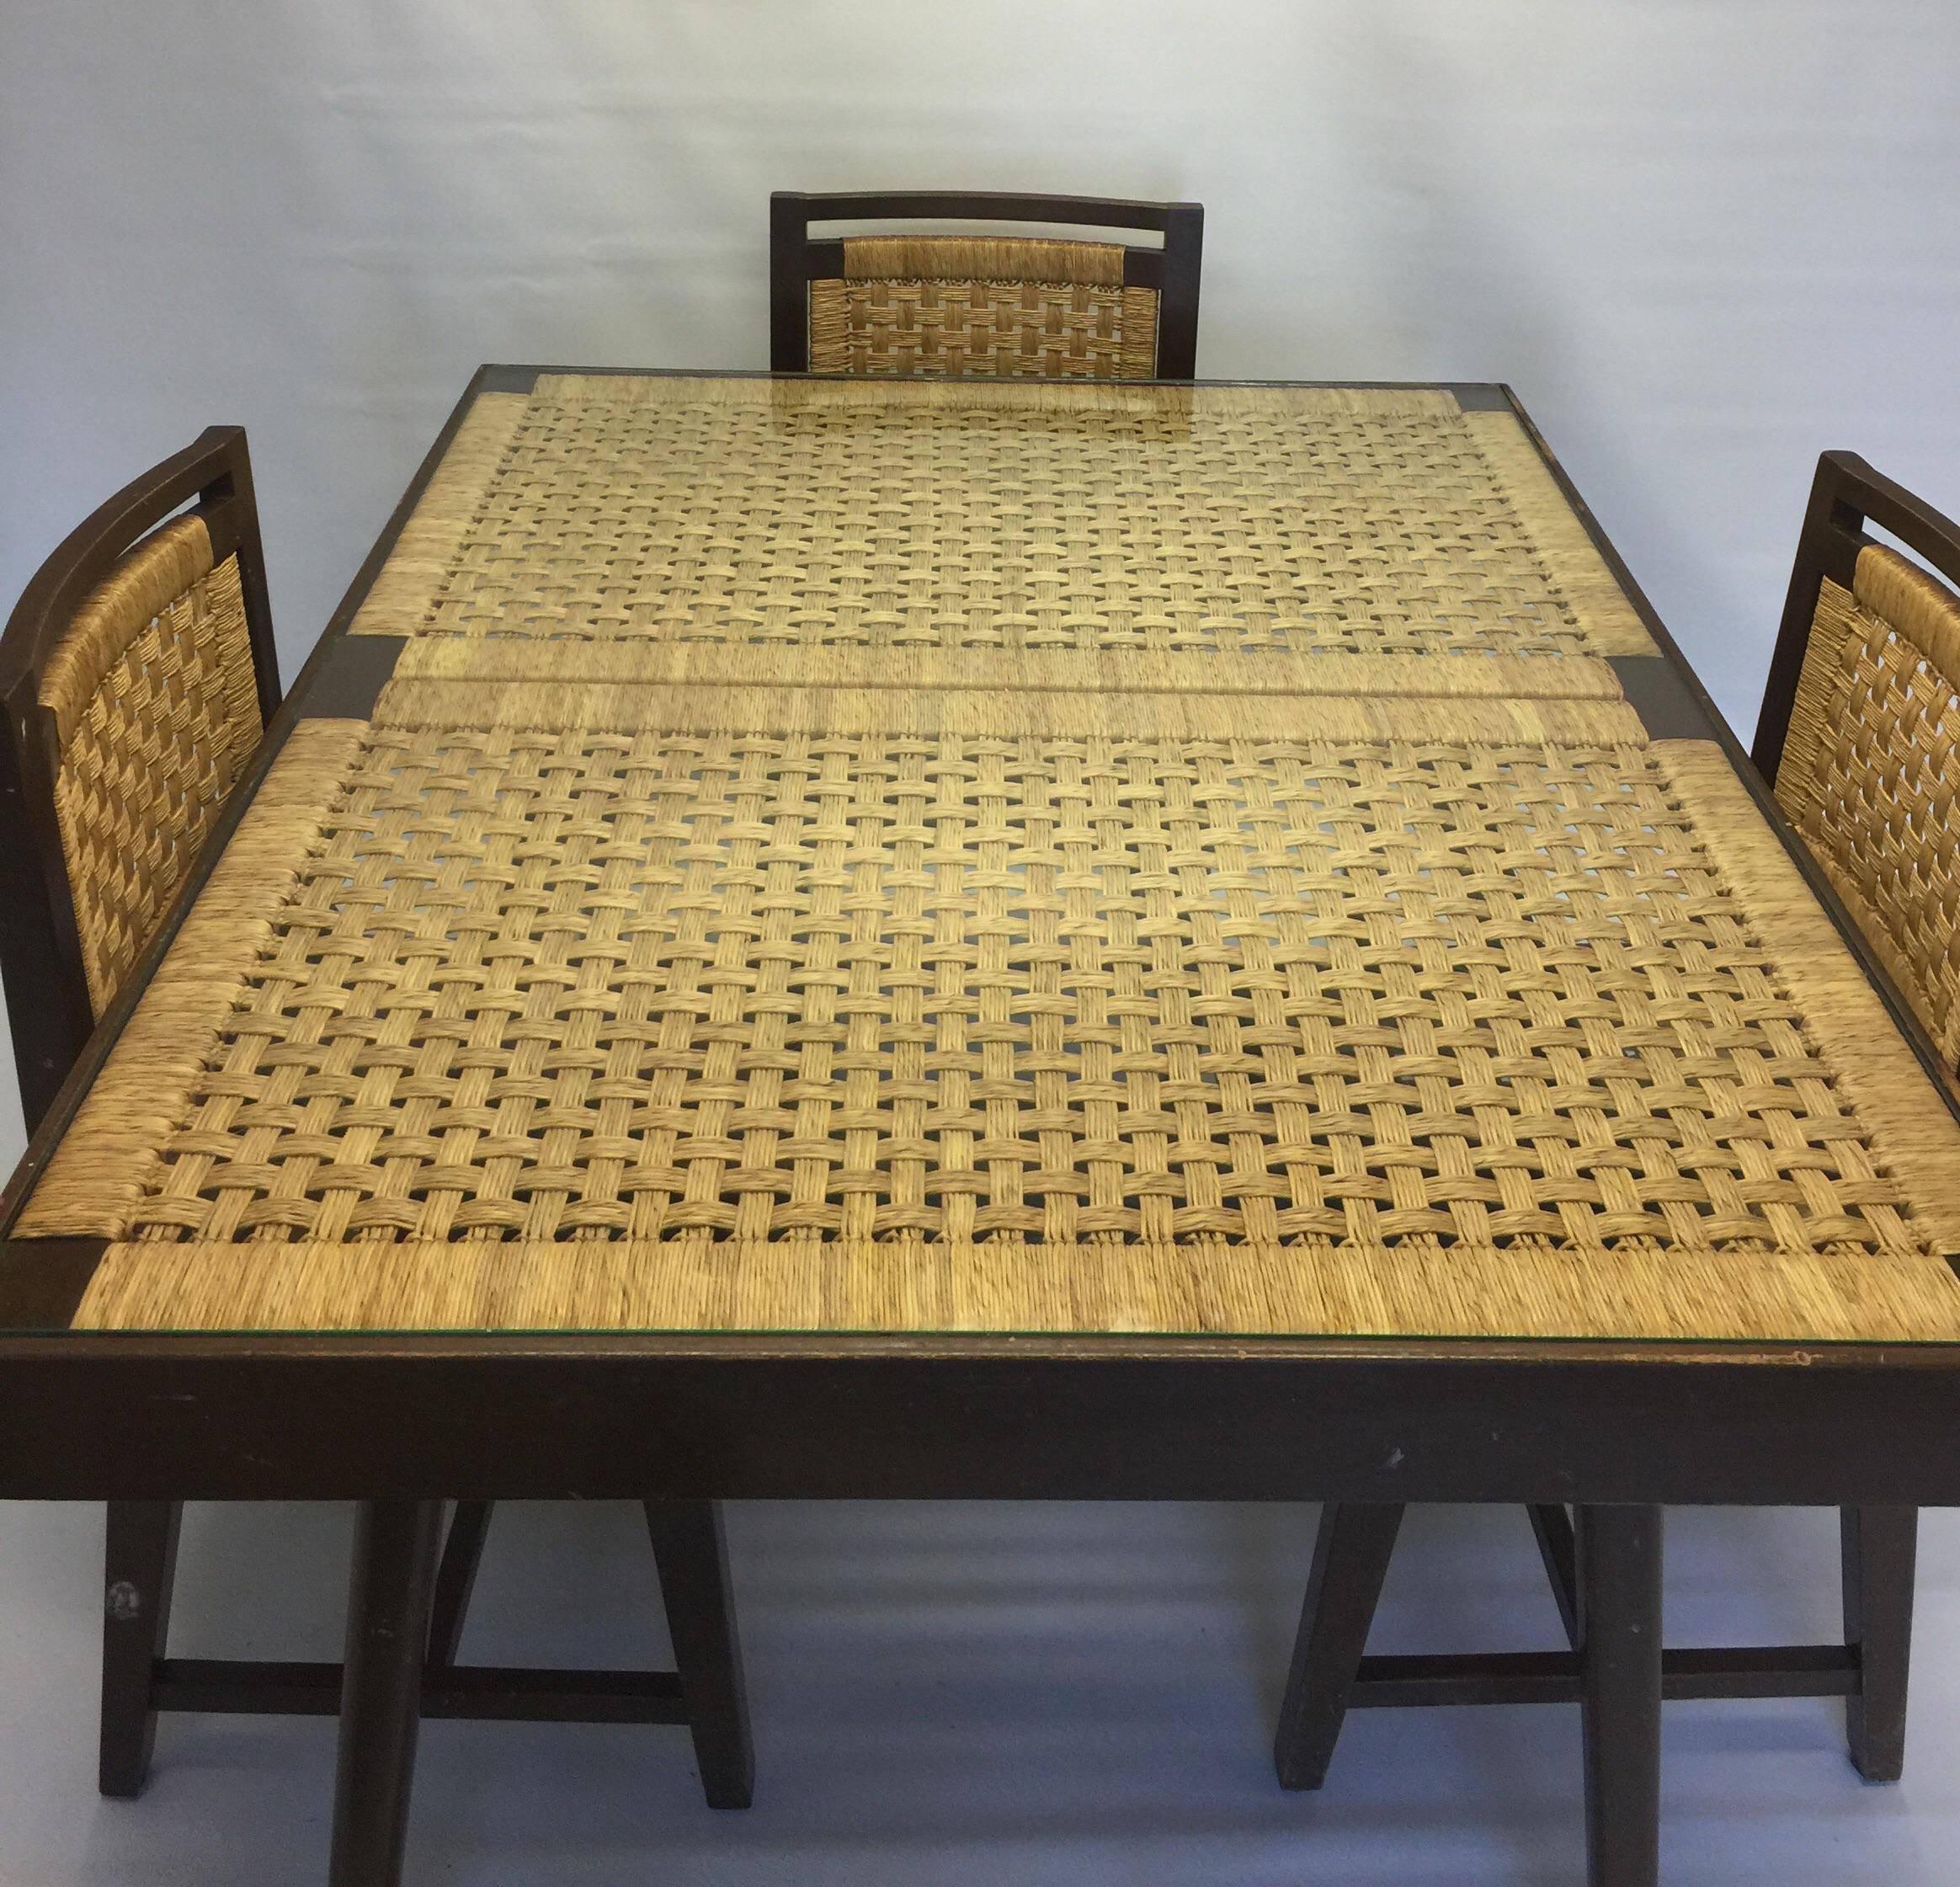 A rare 1960s Mexican modernist dining set, attributed to Michael Van Buren. Set consists of table with four matching chairs. All pieces are crafted from a mahogany-type wood with a walnut color stain/finish. Table top and chairs have a beautifully